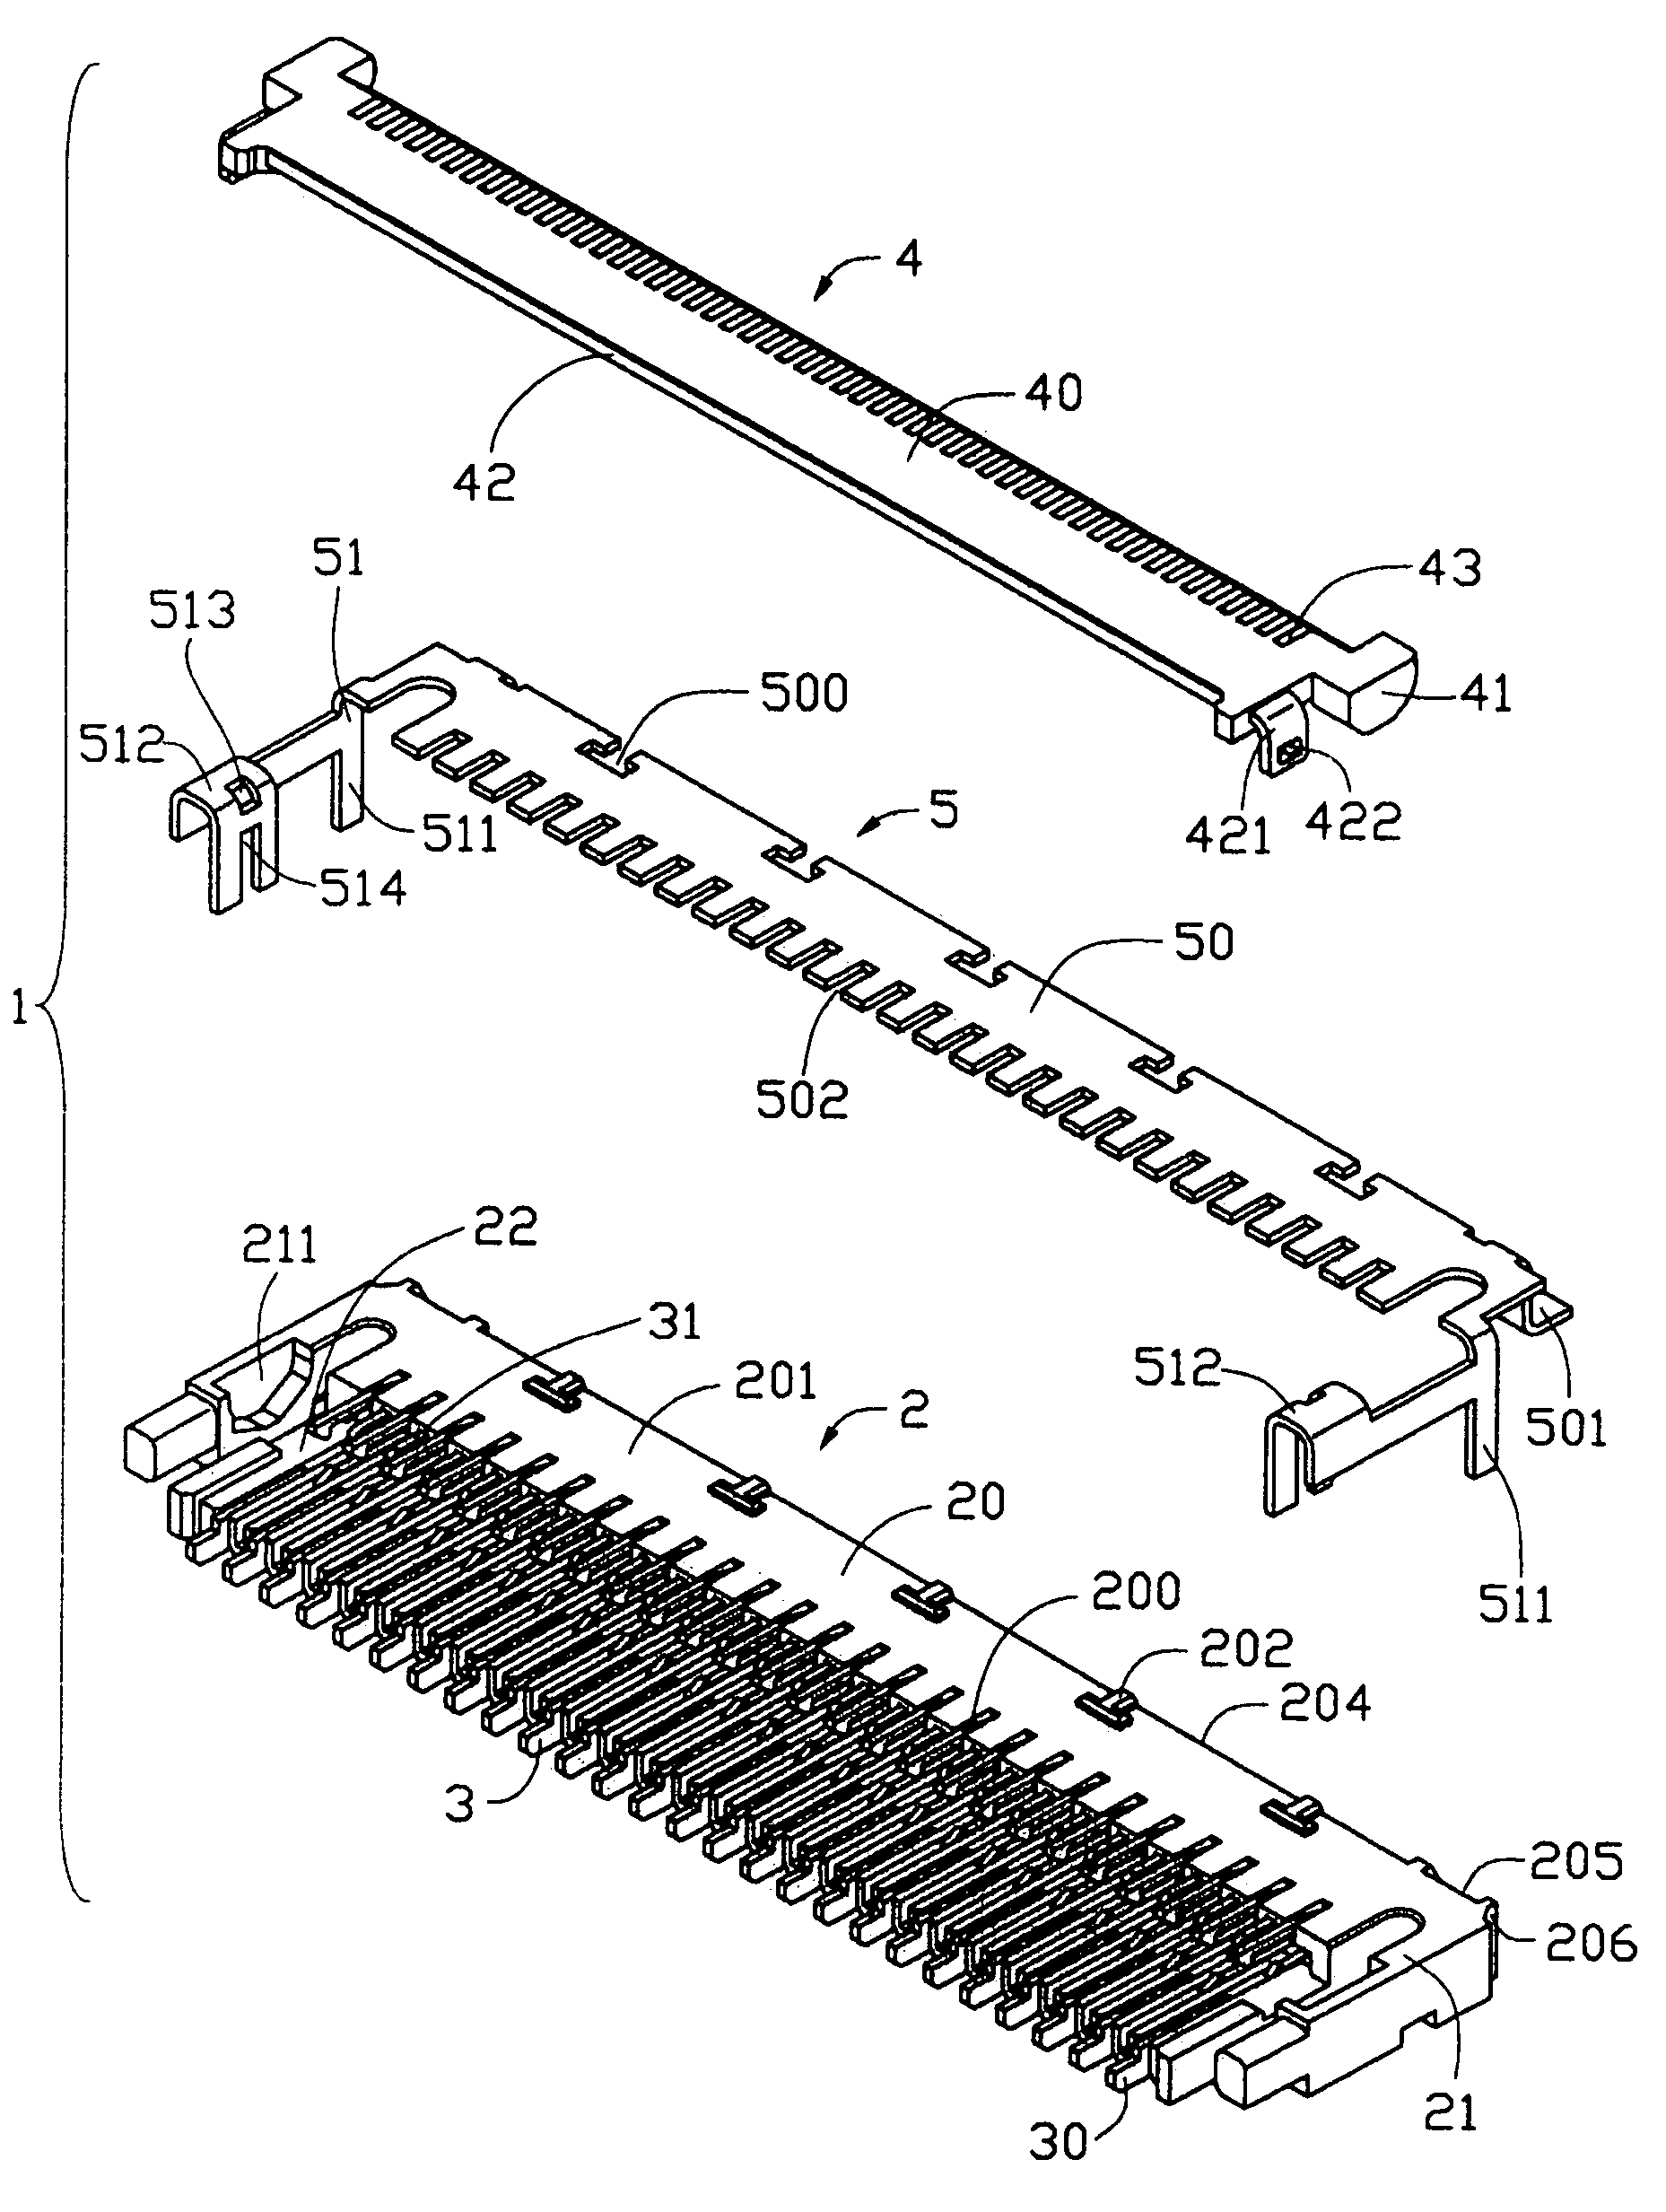 Electrical connector for flexible printed circuit